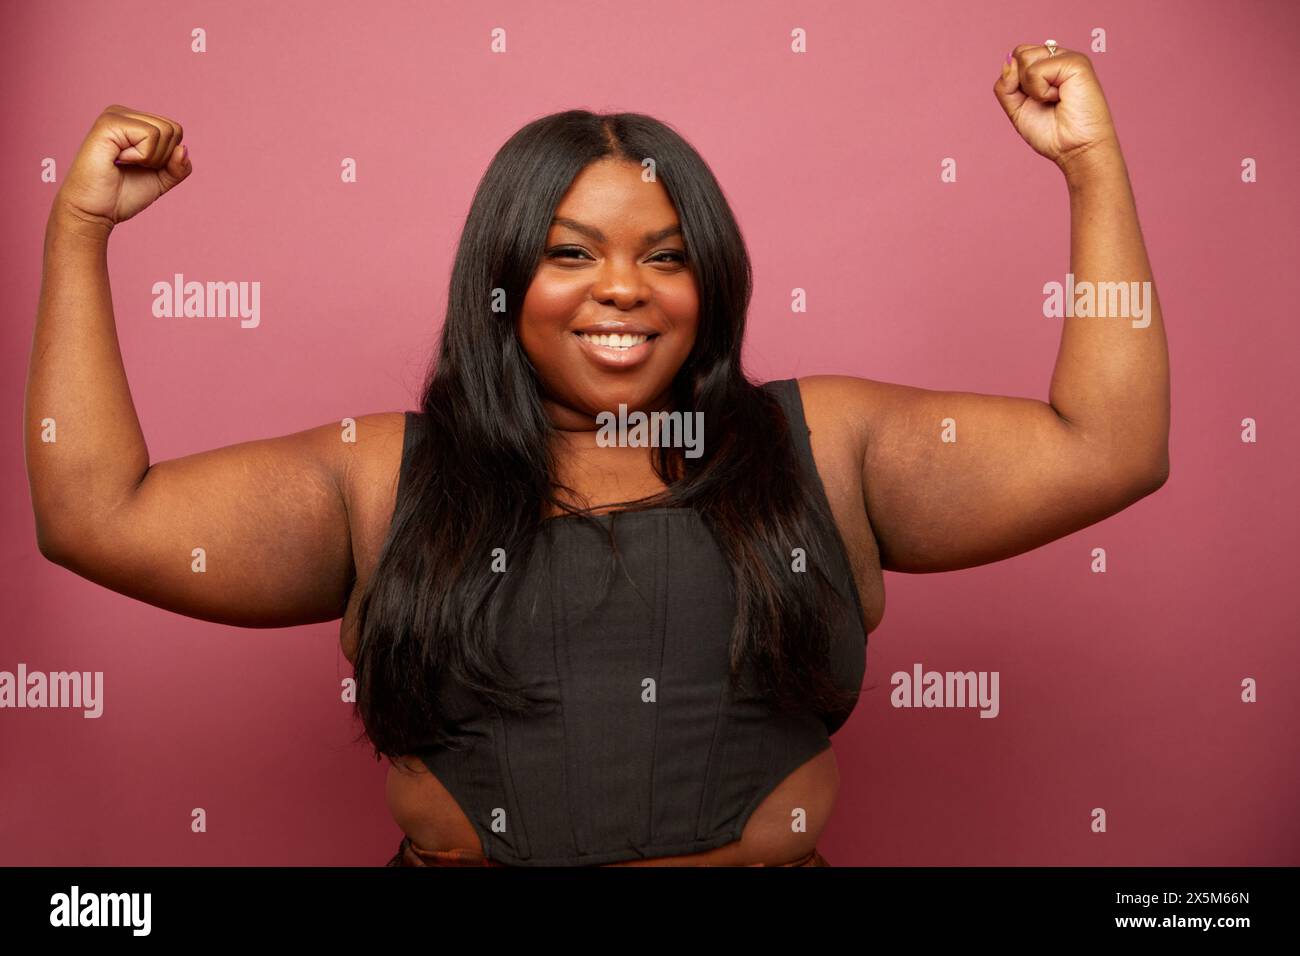 Studio portrait of woman flexing muscles against pink background Stock Photo